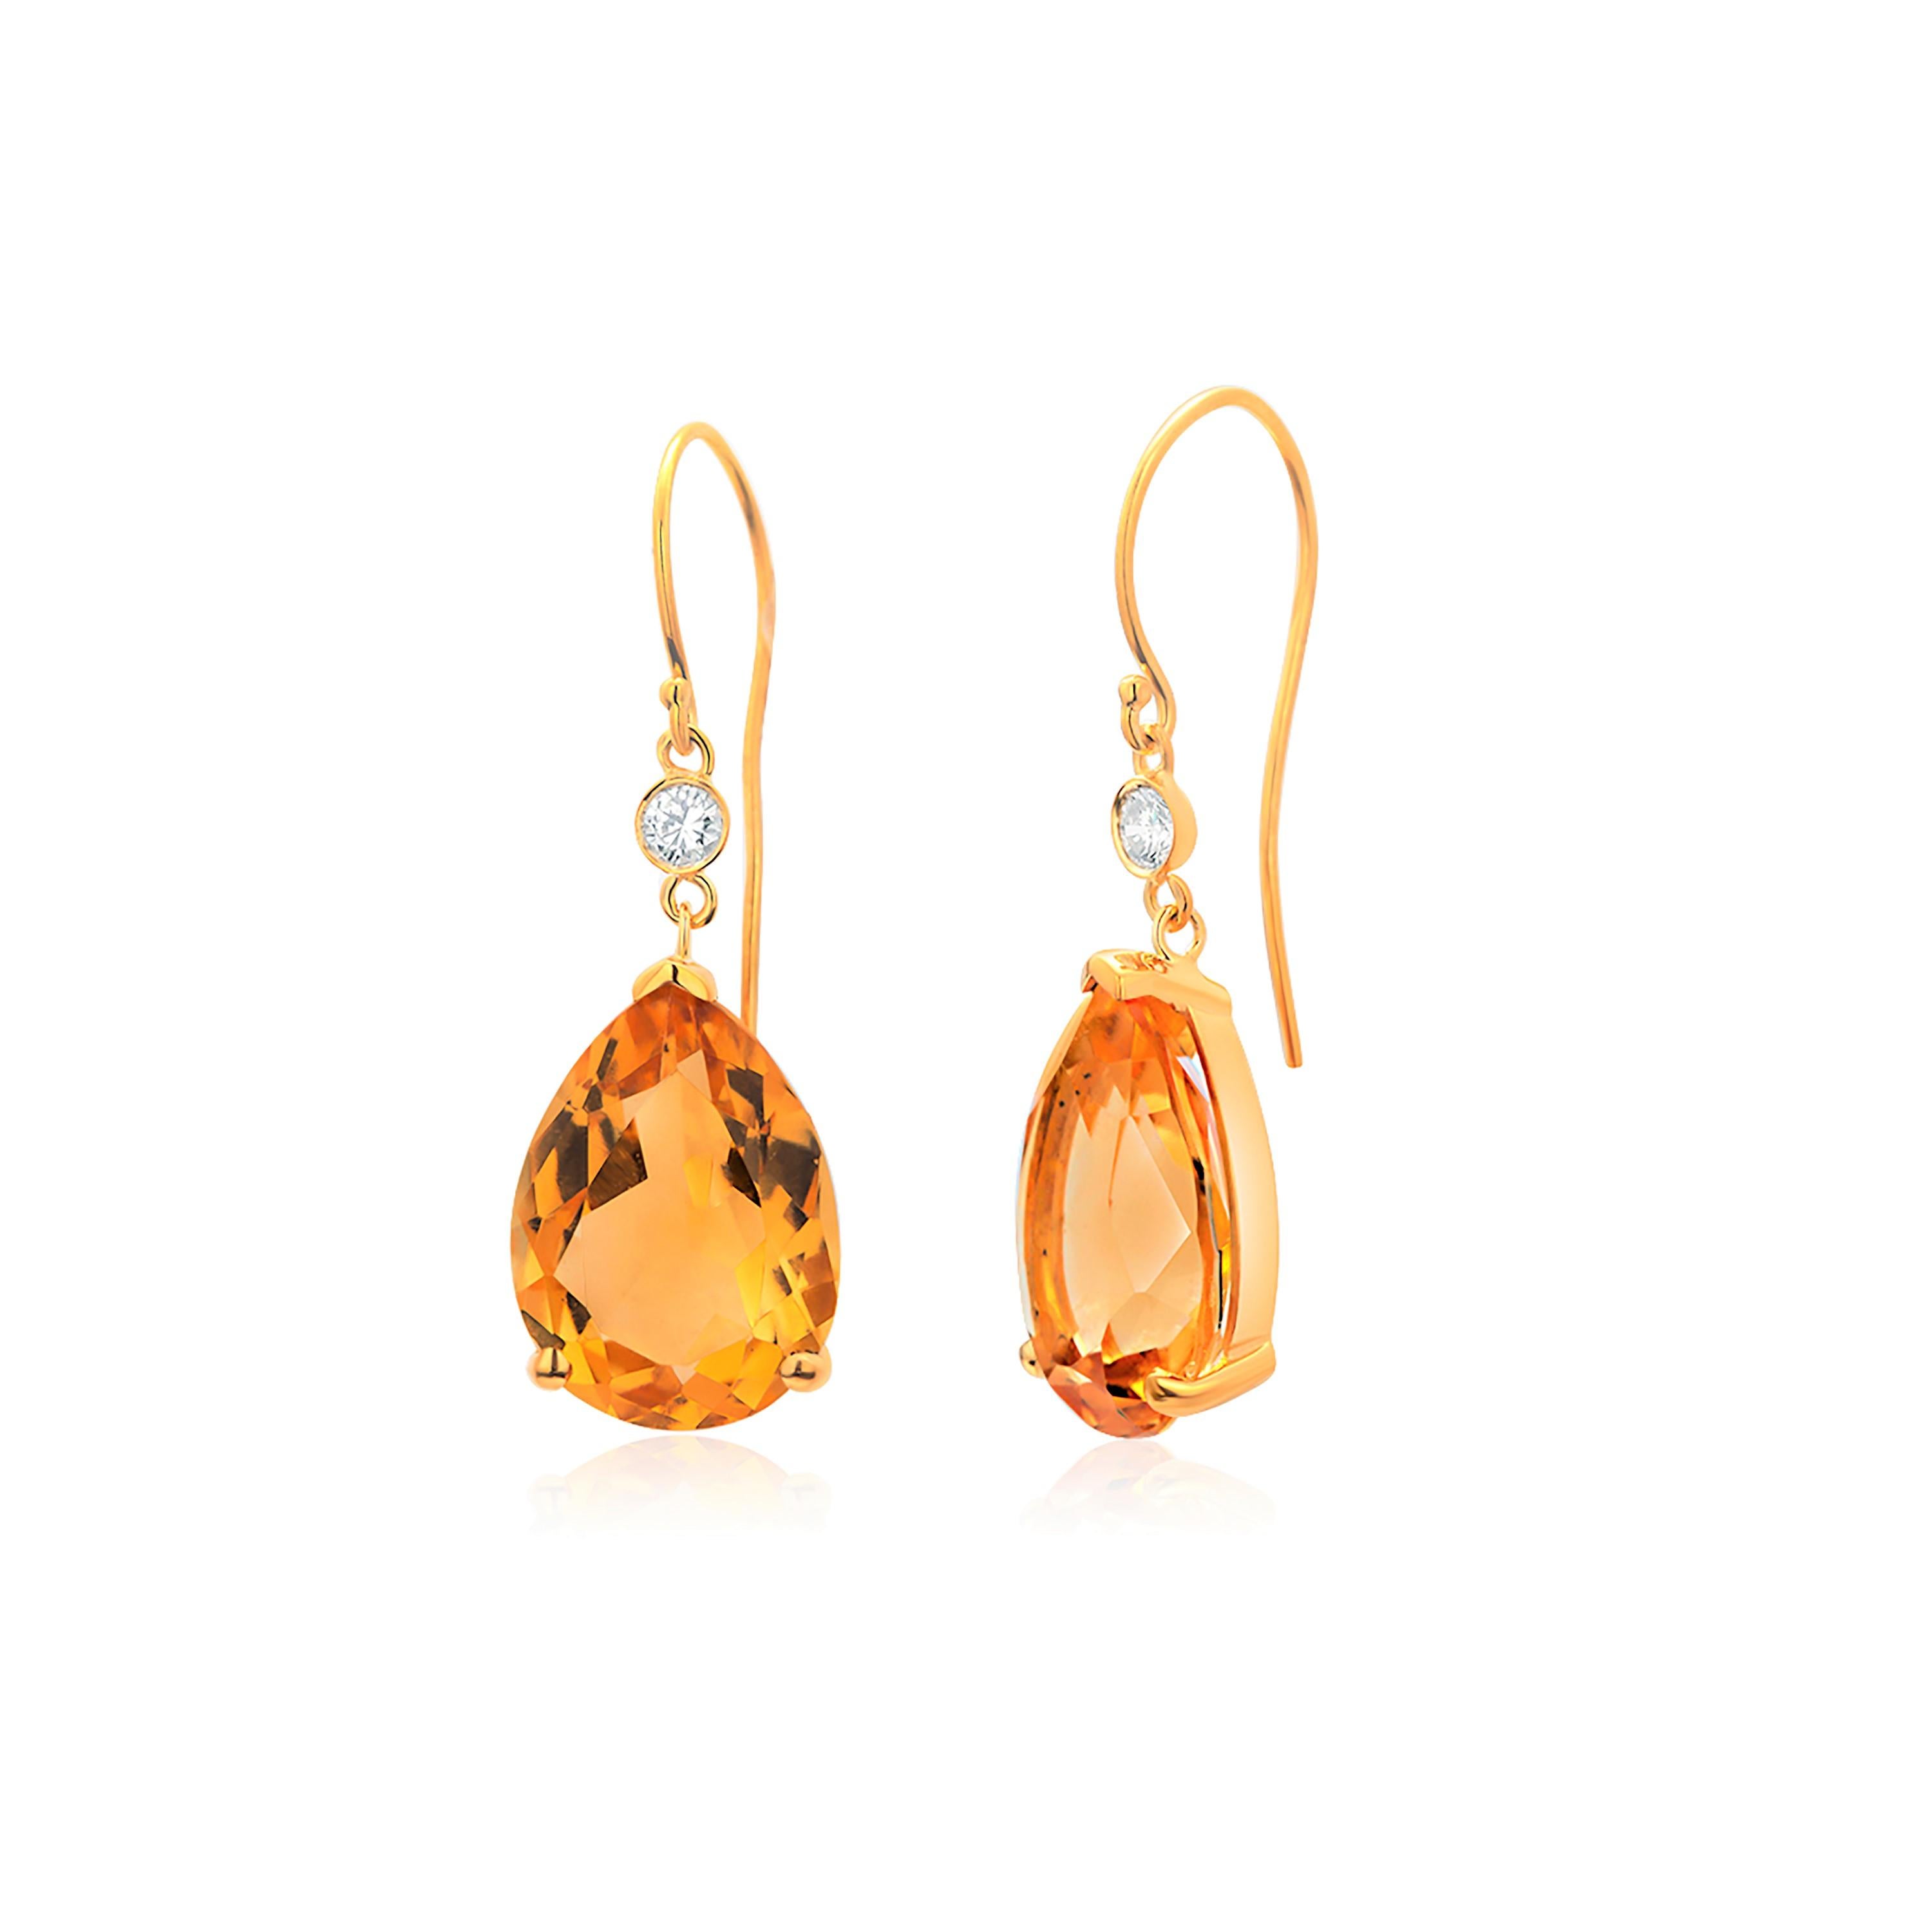 Pear Cut Pear Yellow Citrine and Diamond Gold Wire Hoop Earrings Weighing 17.35 Carat